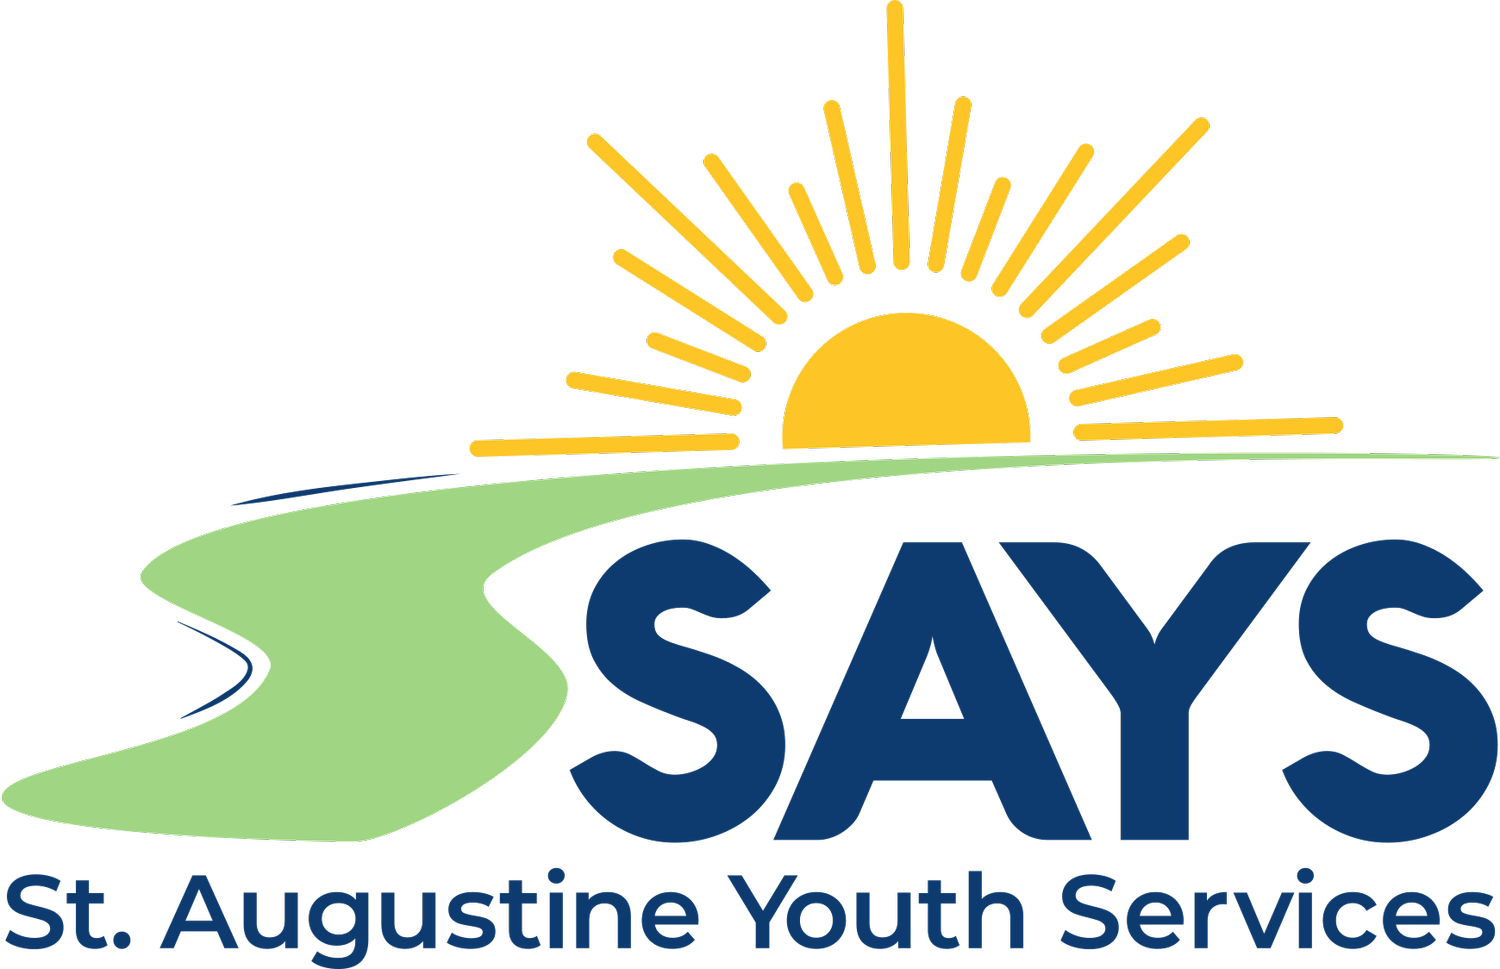 St. Augustine Youth Services